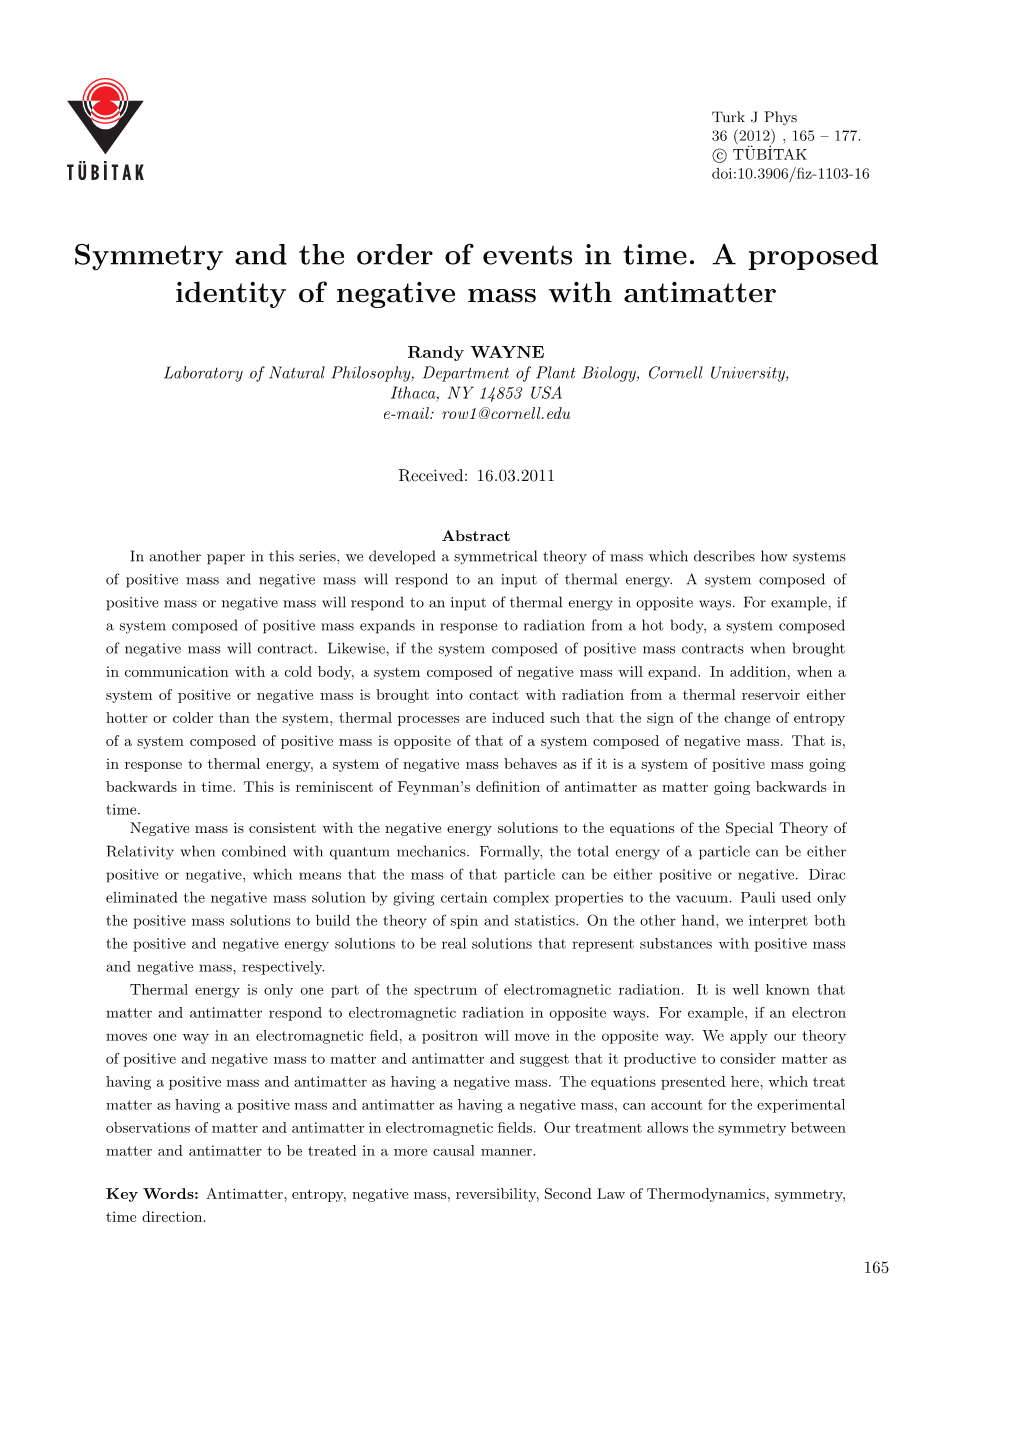 Symmetry and the Order of Events in Time. a Proposed Identity of Negative Mass with Antimatter